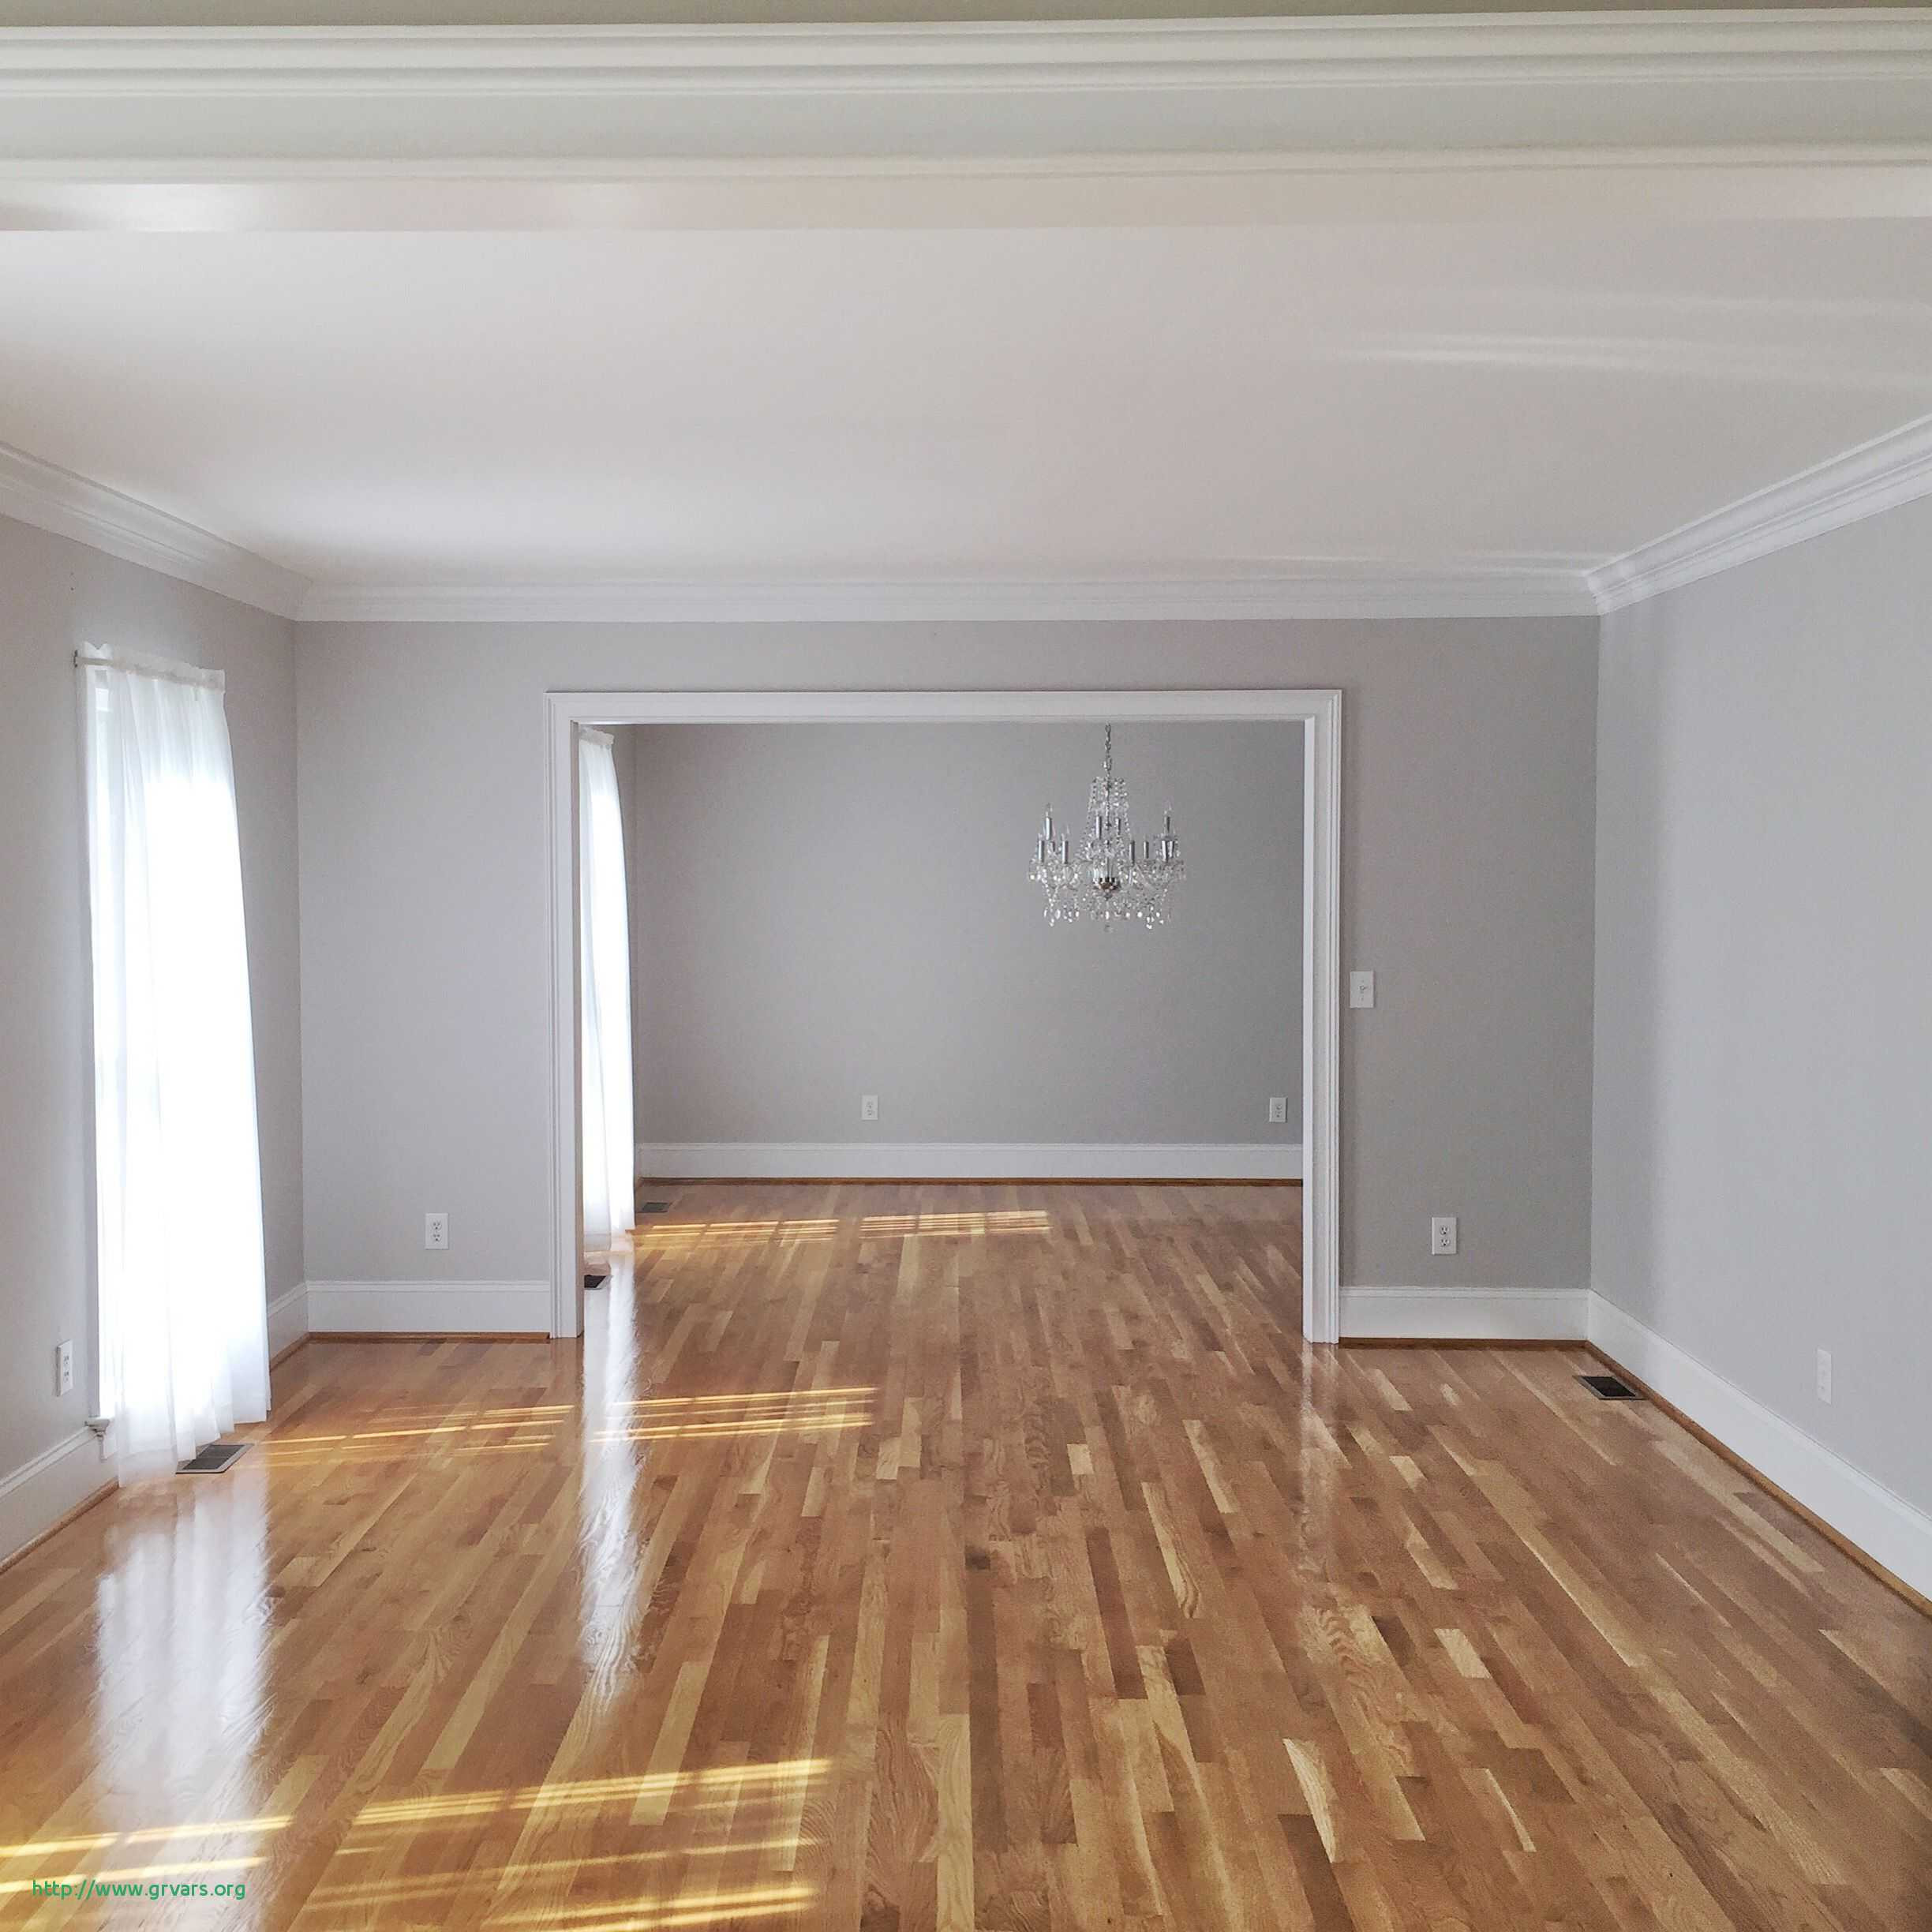 20 Lovable Hardwood Floor Hallway 2024 free download hardwood floor hallway of 23 ac289lagant how to stop hardwood floors from squeaking ideas blog within bethany mitchell homes hardwood floors natural light grey walls